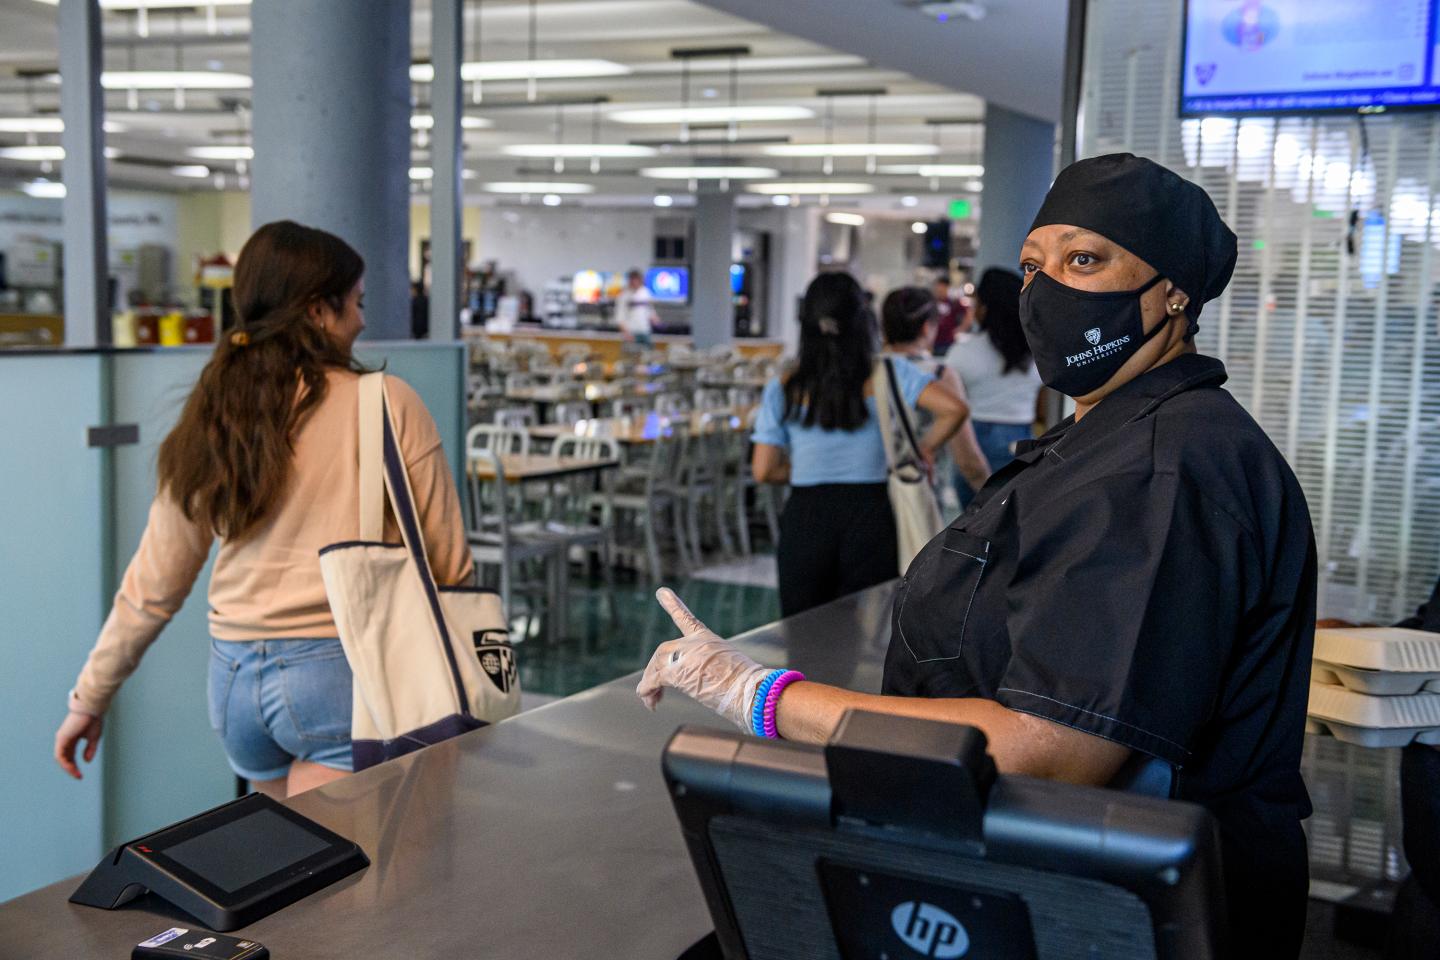 A woman in a black hat, black mask, and black shirt stands at a cash register as students file past her into a dining area